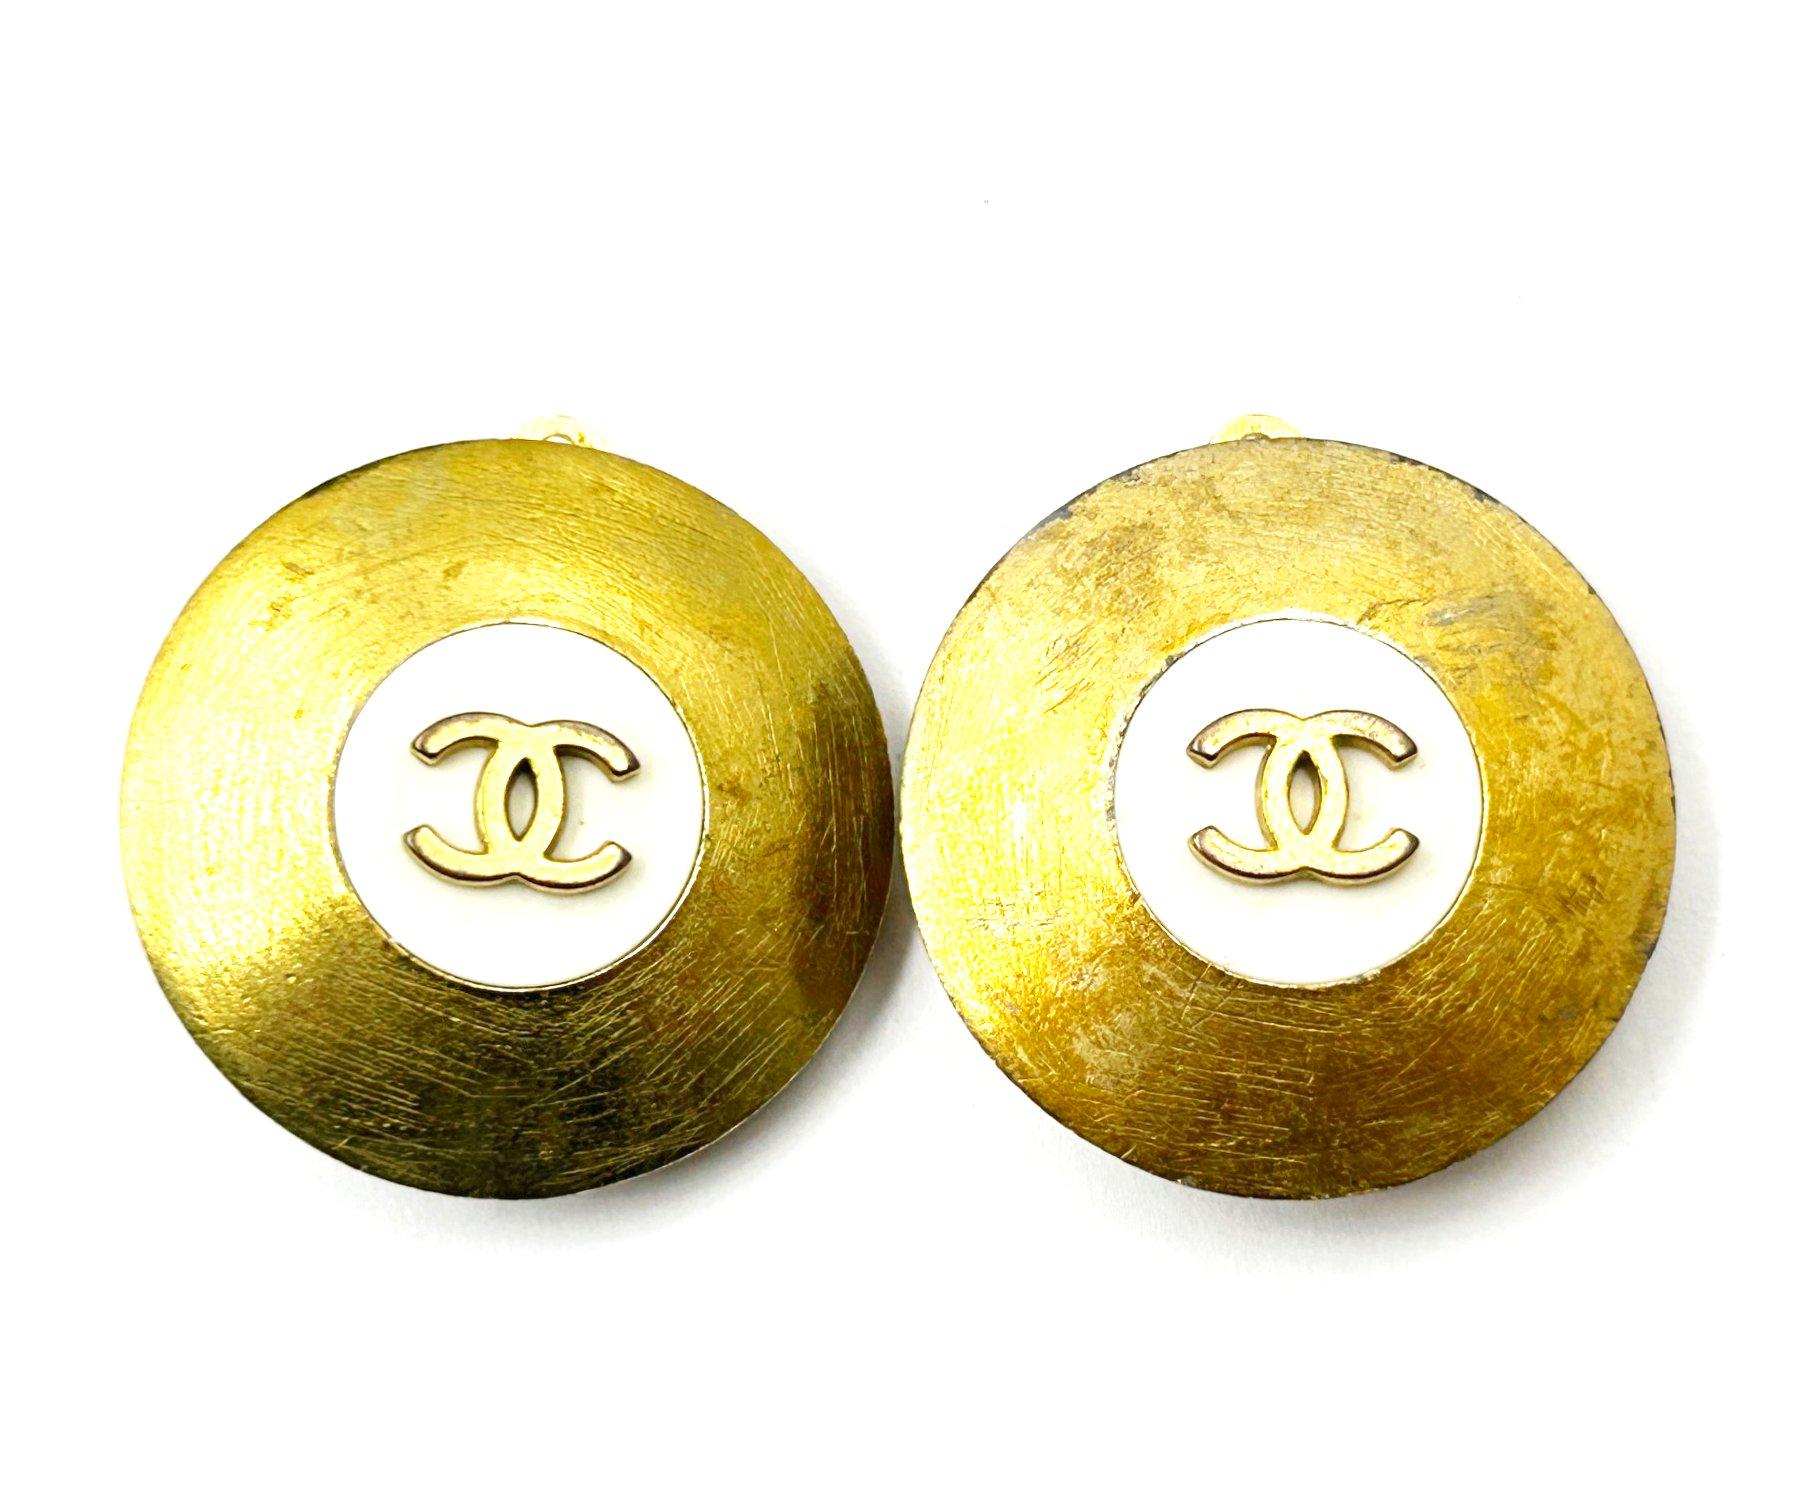 Chanel Vintage Gold Plated CC White Disc Large Clip On Earrings

*Marked 94
*Made in France
*Comes with the original box

-It is approximately 1.25